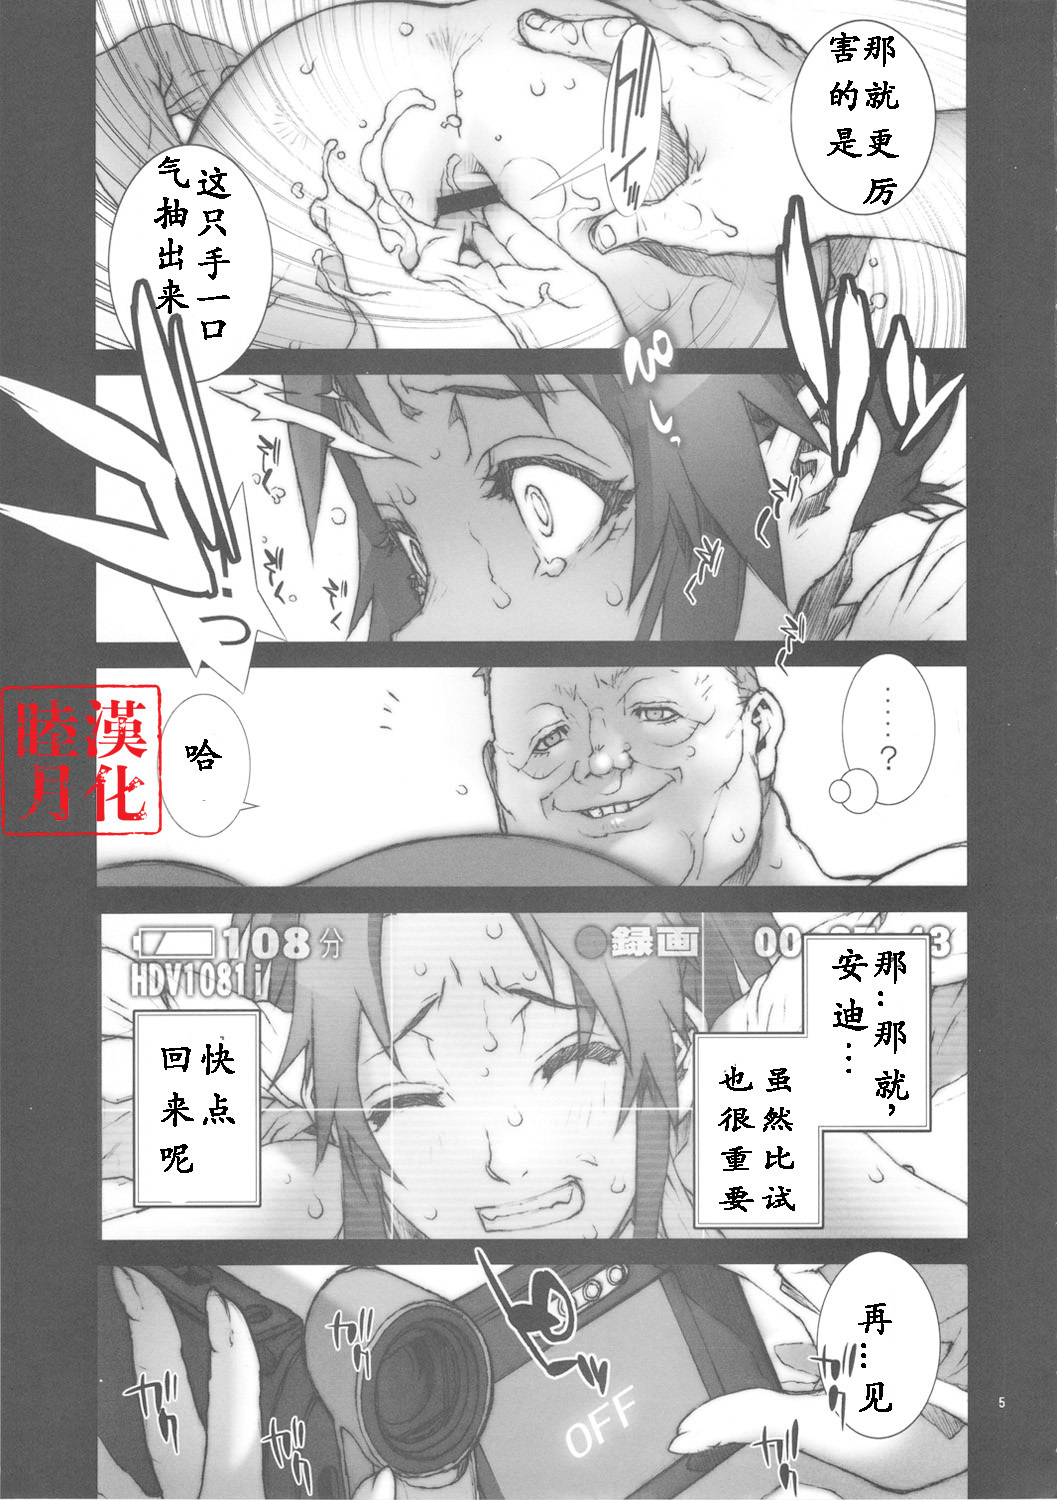 (C80) [P-collection (nori-haru)] Kachousen Go (King of Fighters) [Chinese] [睦月汉化組] page 6 full